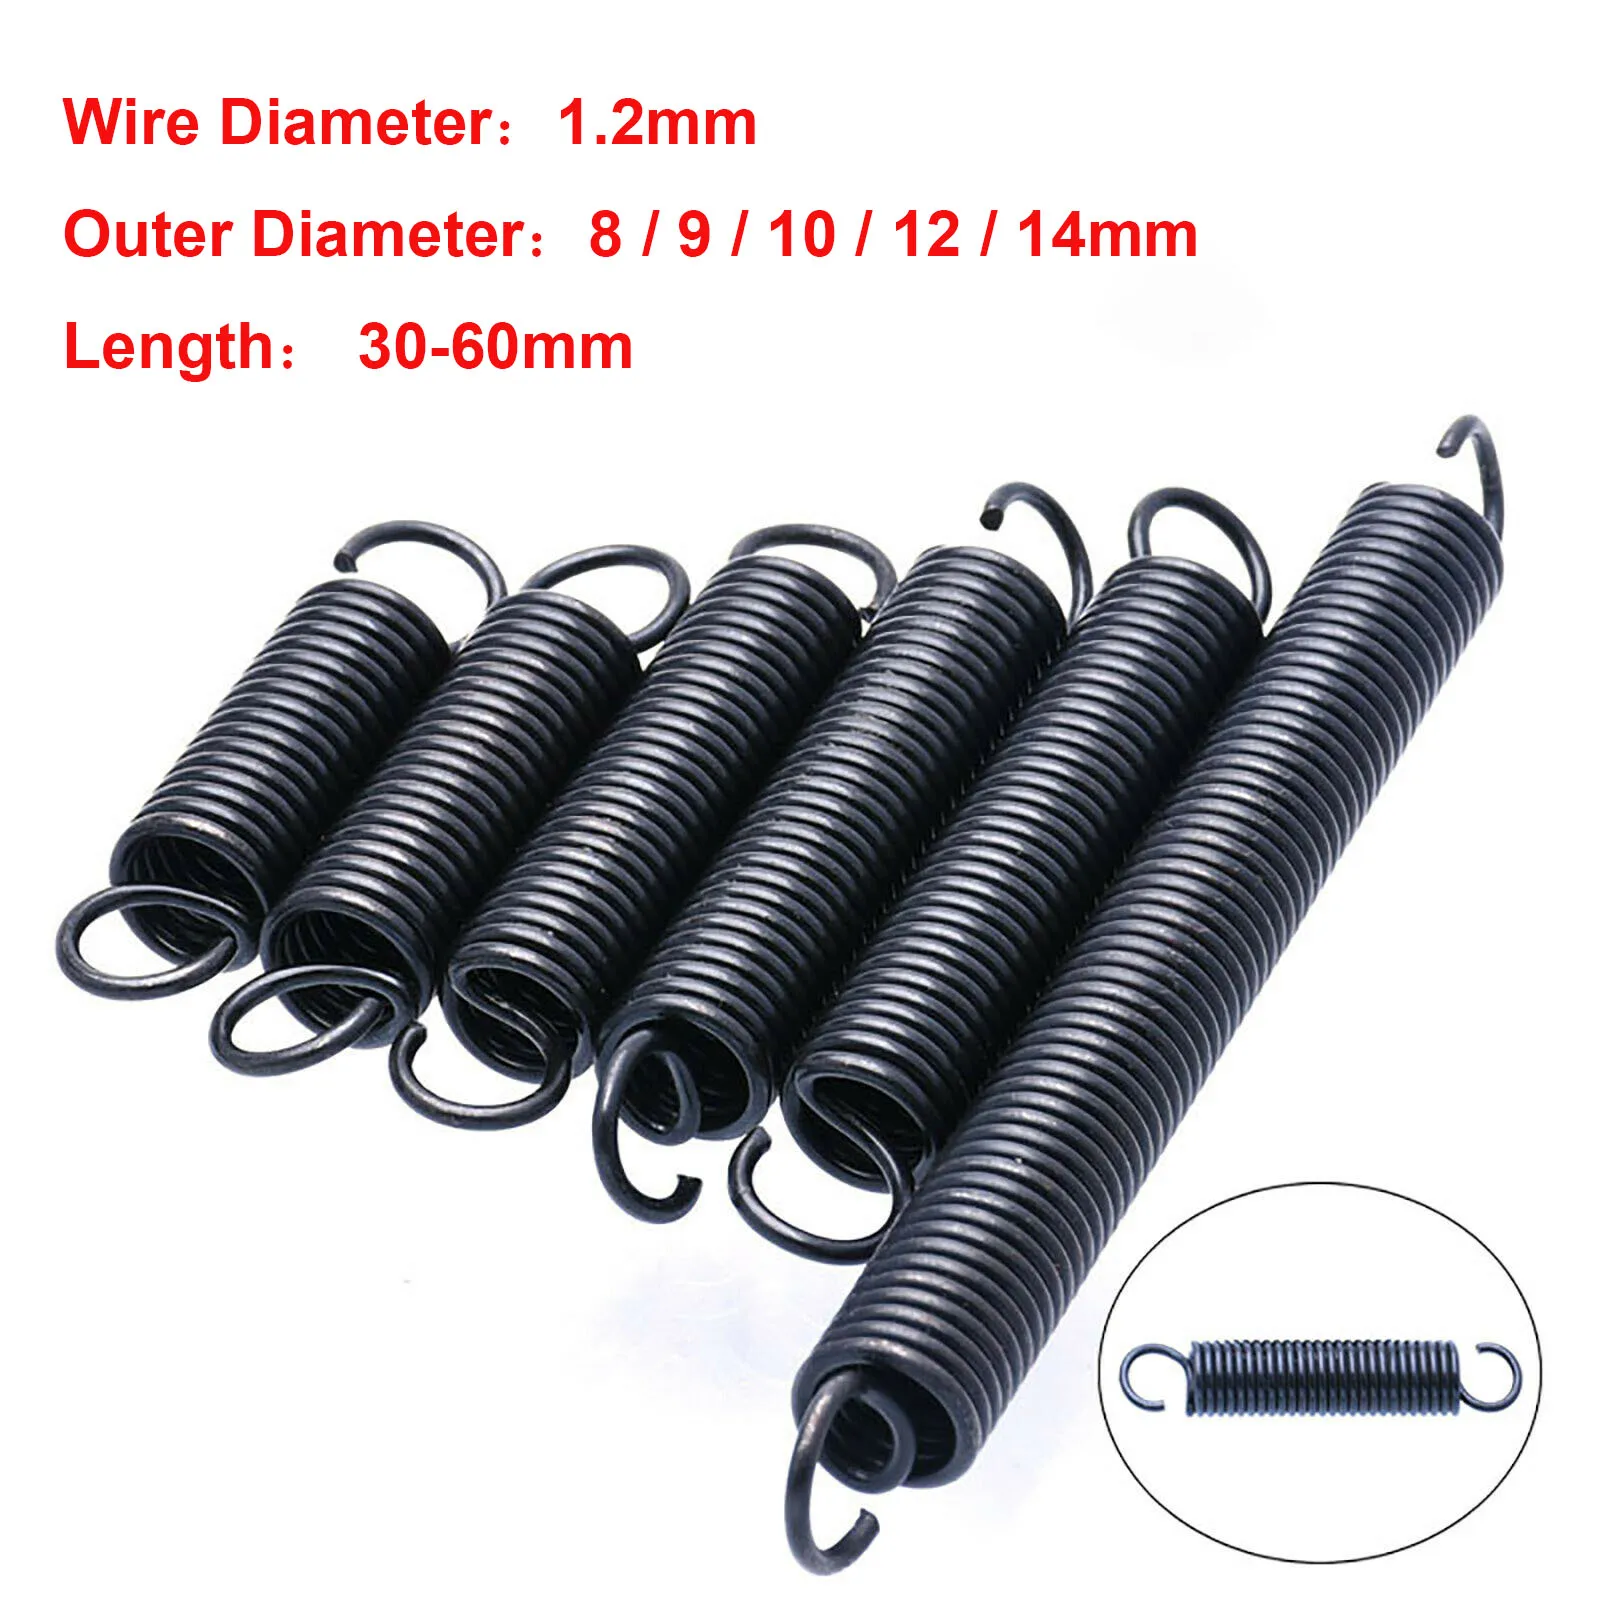 

5Pcs Wire Dia 1.2mm Spring Steel Tension Spring S Hook Cylindroid Helical Pullback Extension Spring OD 8mm-14mm Length 30 - 60mm